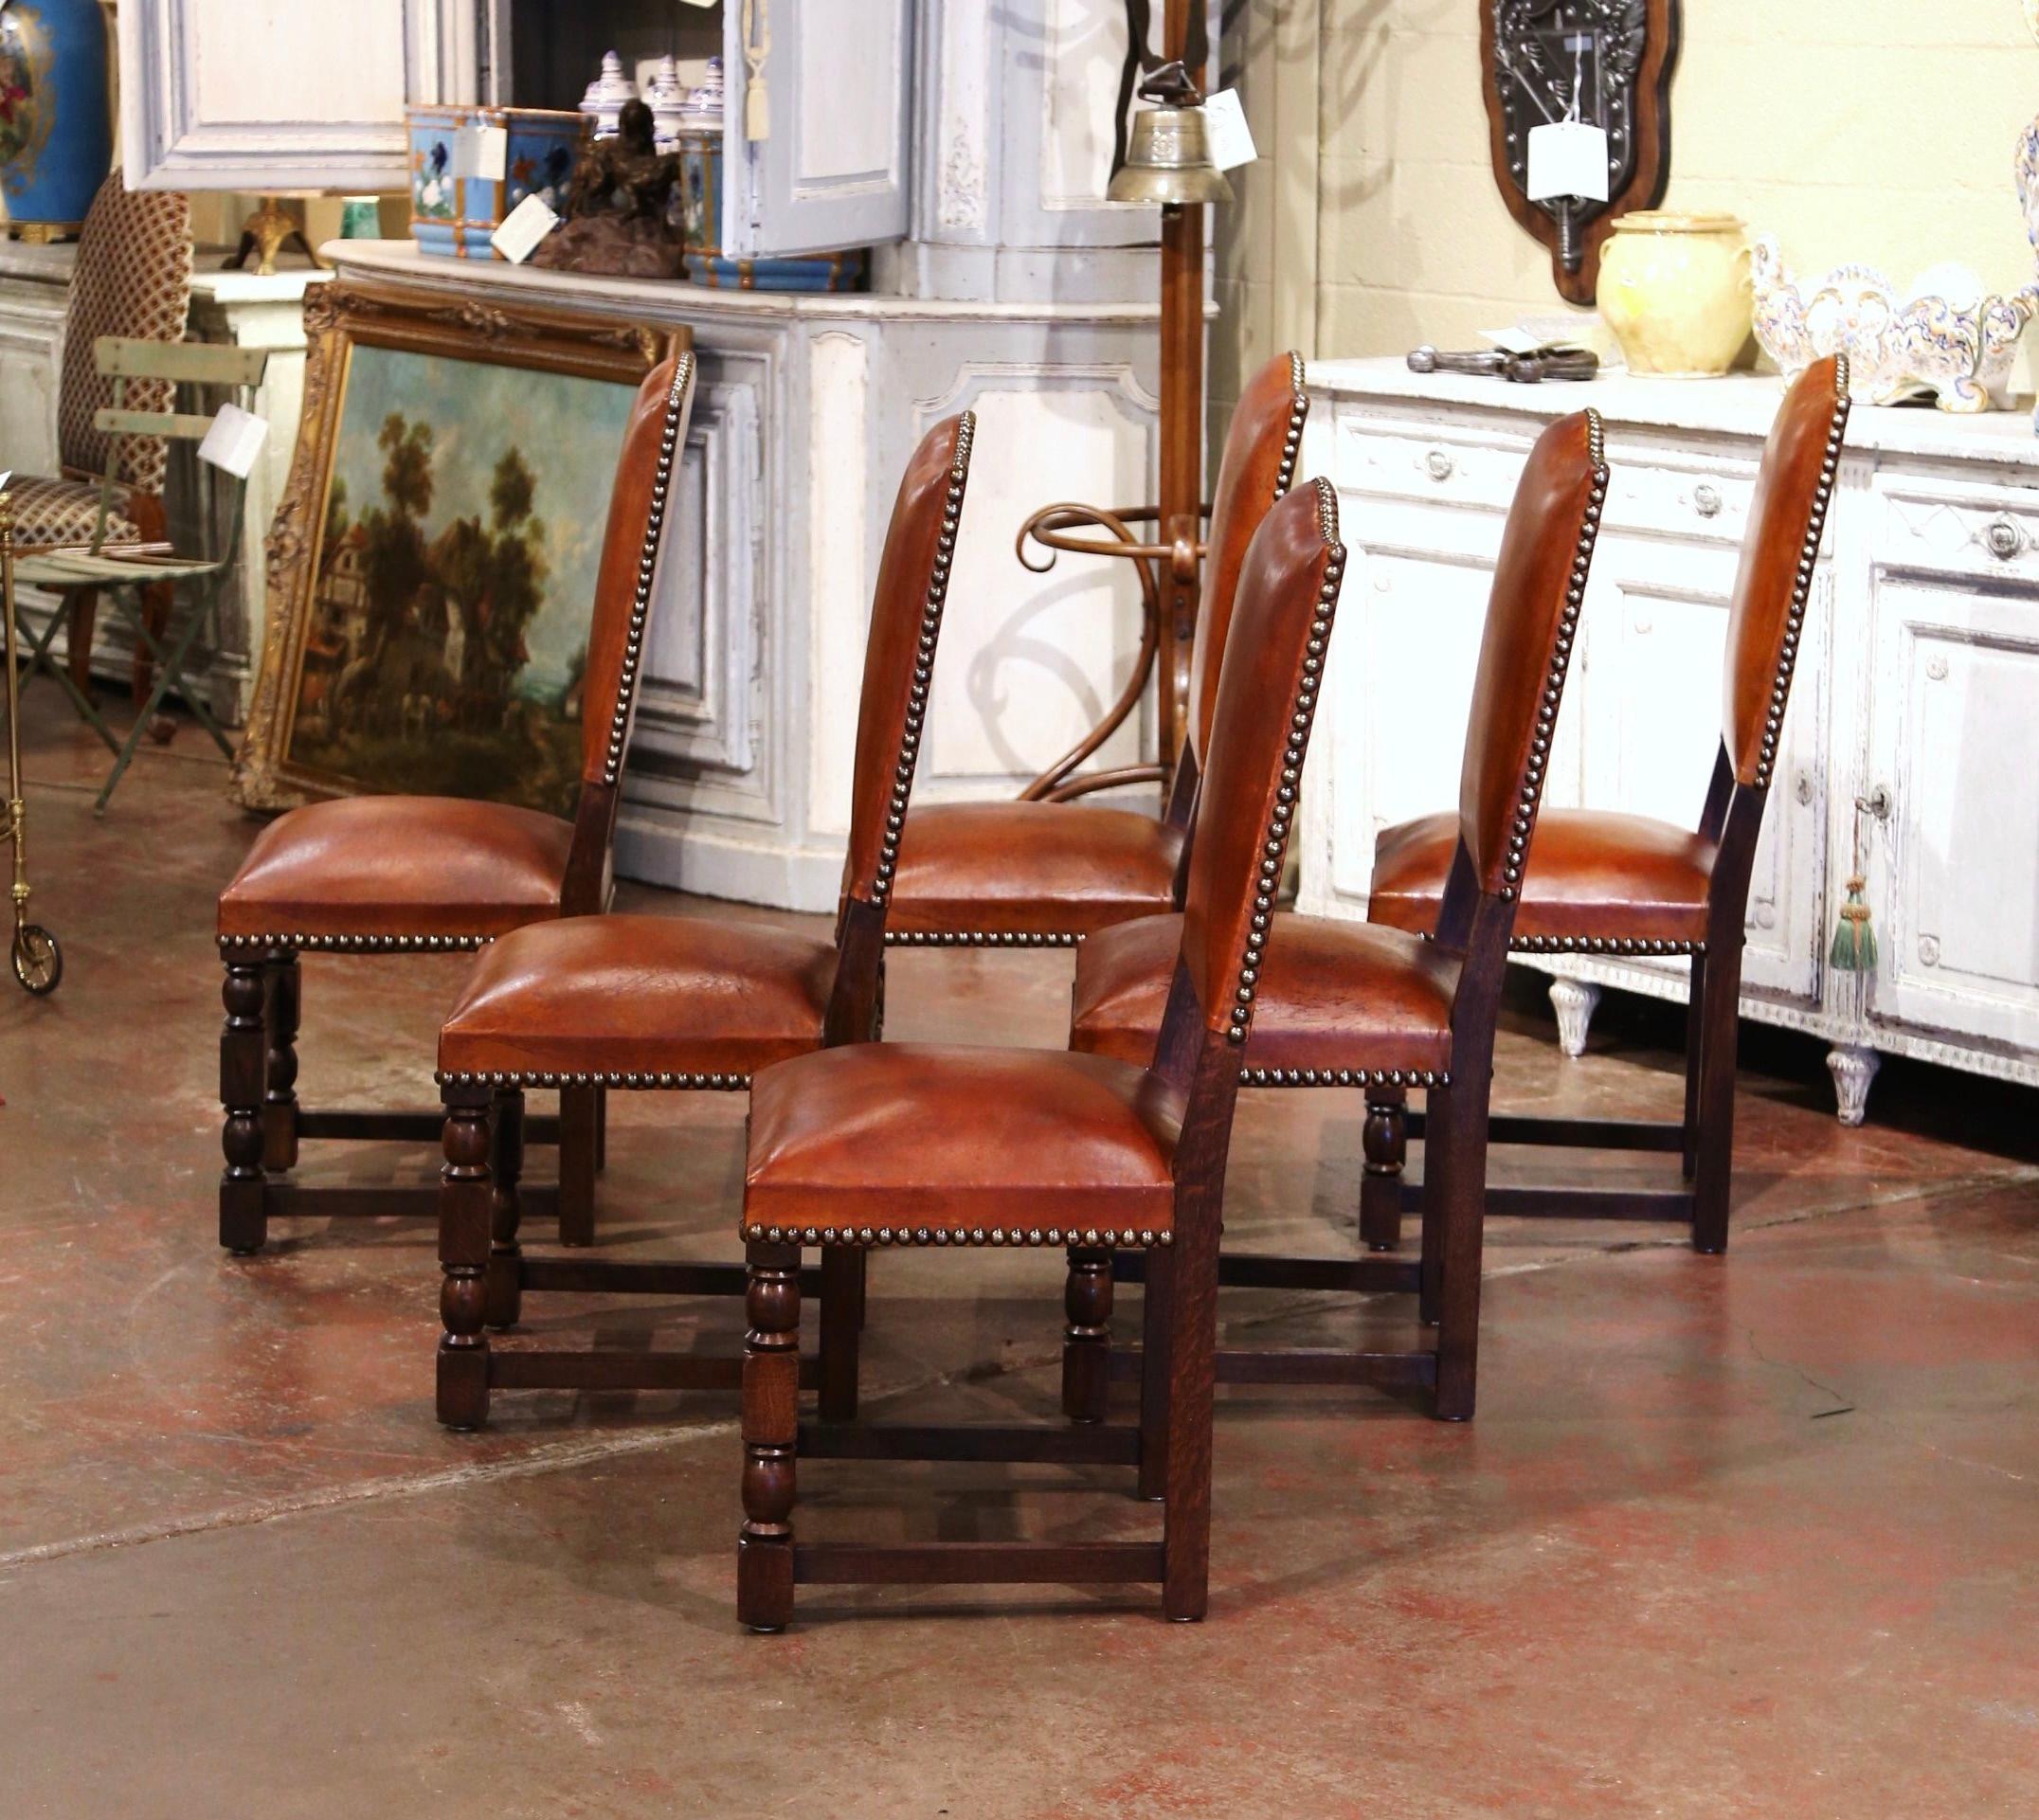 Dress a dining table with this elegant suite of antique chairs. Crafted in France, circa 1880, each side chair stands on front turned legs, and is decorated with a carved front stretcher. Each chair has a tall arched back and deep seat, both